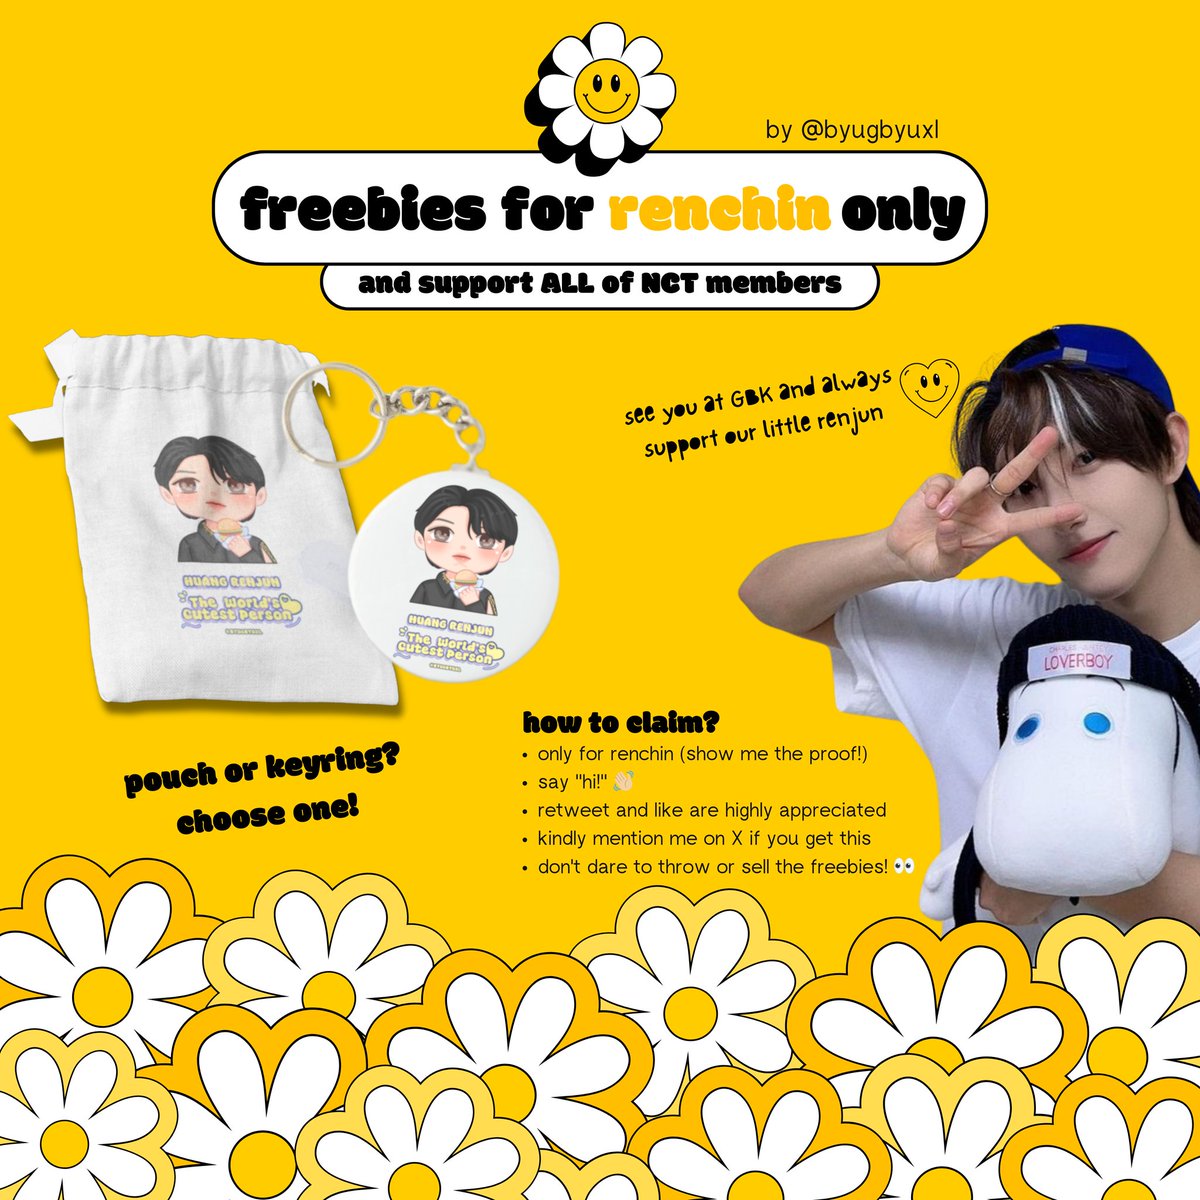 ᰔᩚ FREEBIES TDS 3 JAKARTA ᰔᩚ 

by @byugbyuxl 

[rt/likes are appreciated]

🗓 18 Mei 2024
📍 GBK
⏰ TBA

limited quantity!!!!!

see you! ♡ 

#TDS3INJAKARTA #THEDREAMSHOW3_IN_JAKARTA